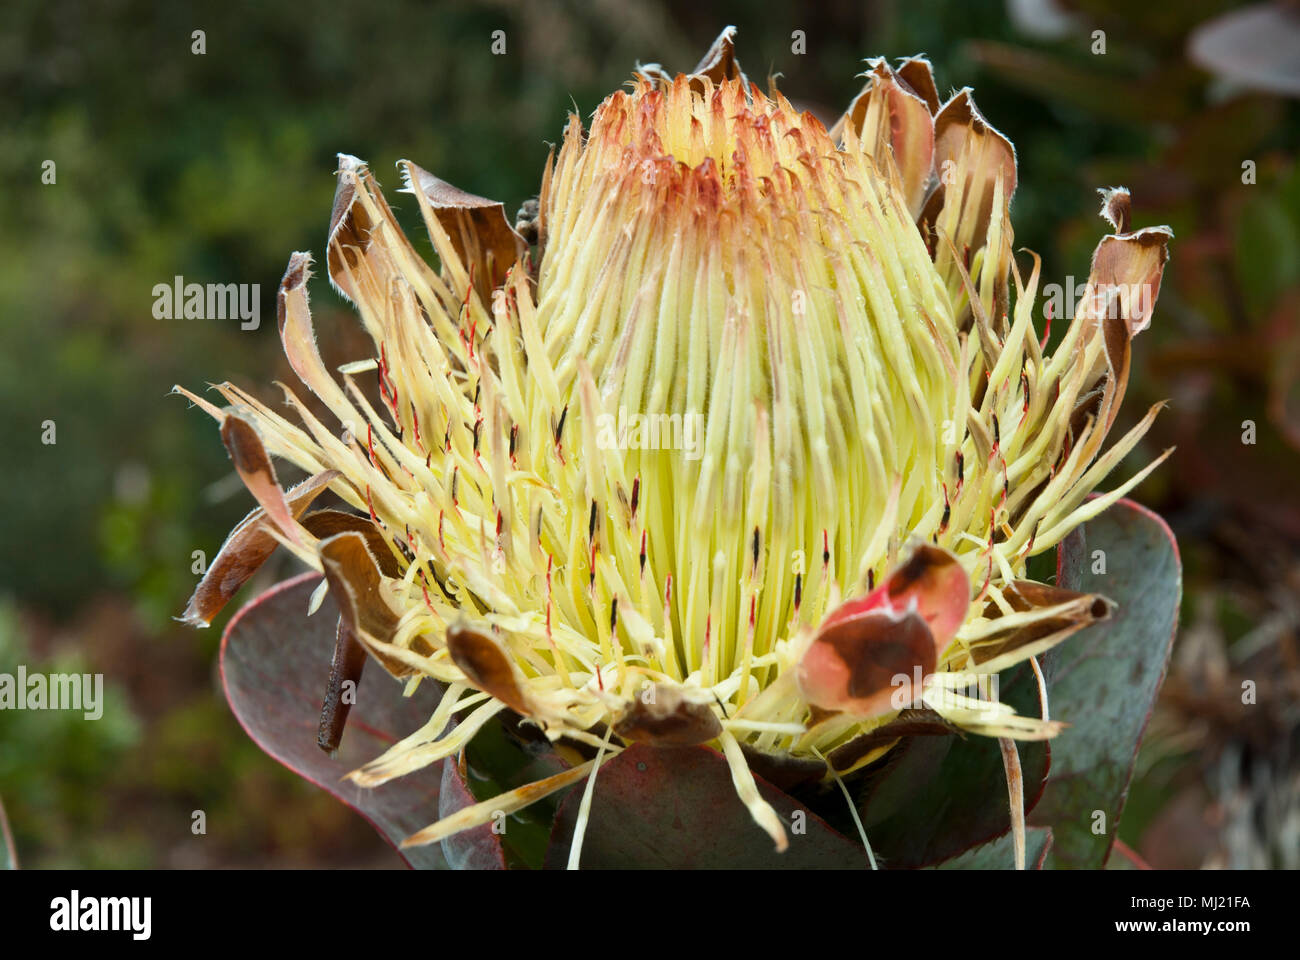 Large yellow flower of Protea Eximia with bracts opening. Stock Photo